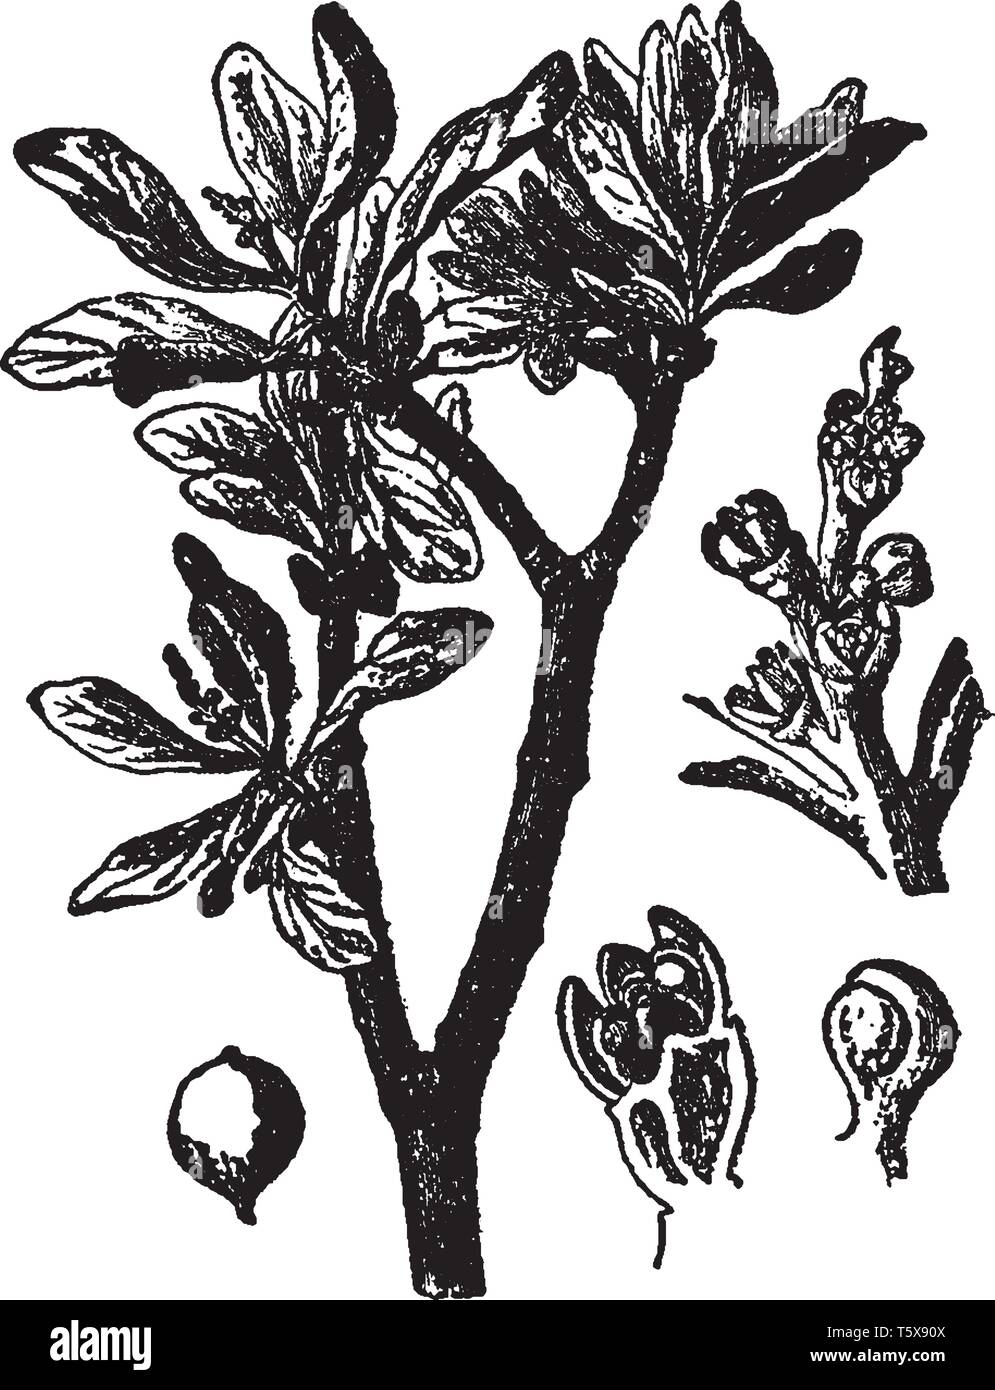 This is the branch of Loranthus Europaes. It is a genus of parasitic plant, vintage line drawing or engraving illustration. Stock Vector